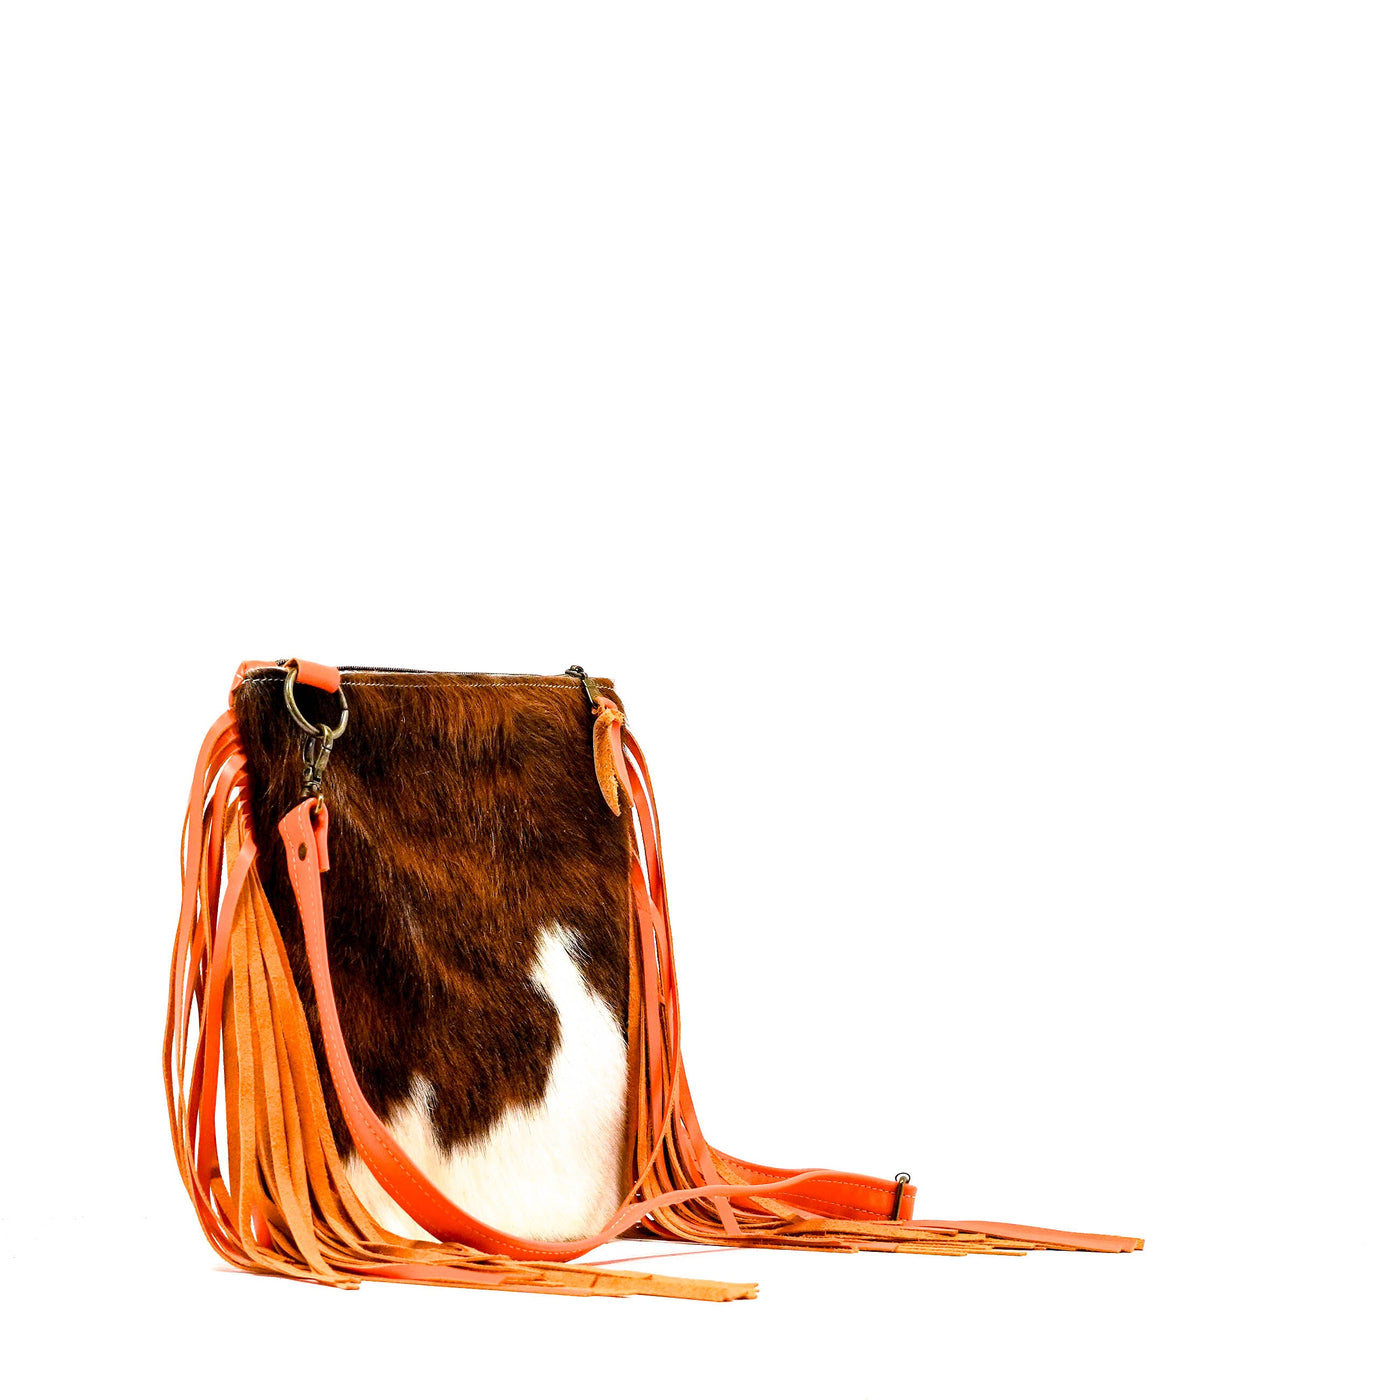 Shania - Tricolor w/ Tangerine Leather-Shania-Western-Cowhide-Bags-Handmade-Products-Gifts-Dancing Cactus Designs